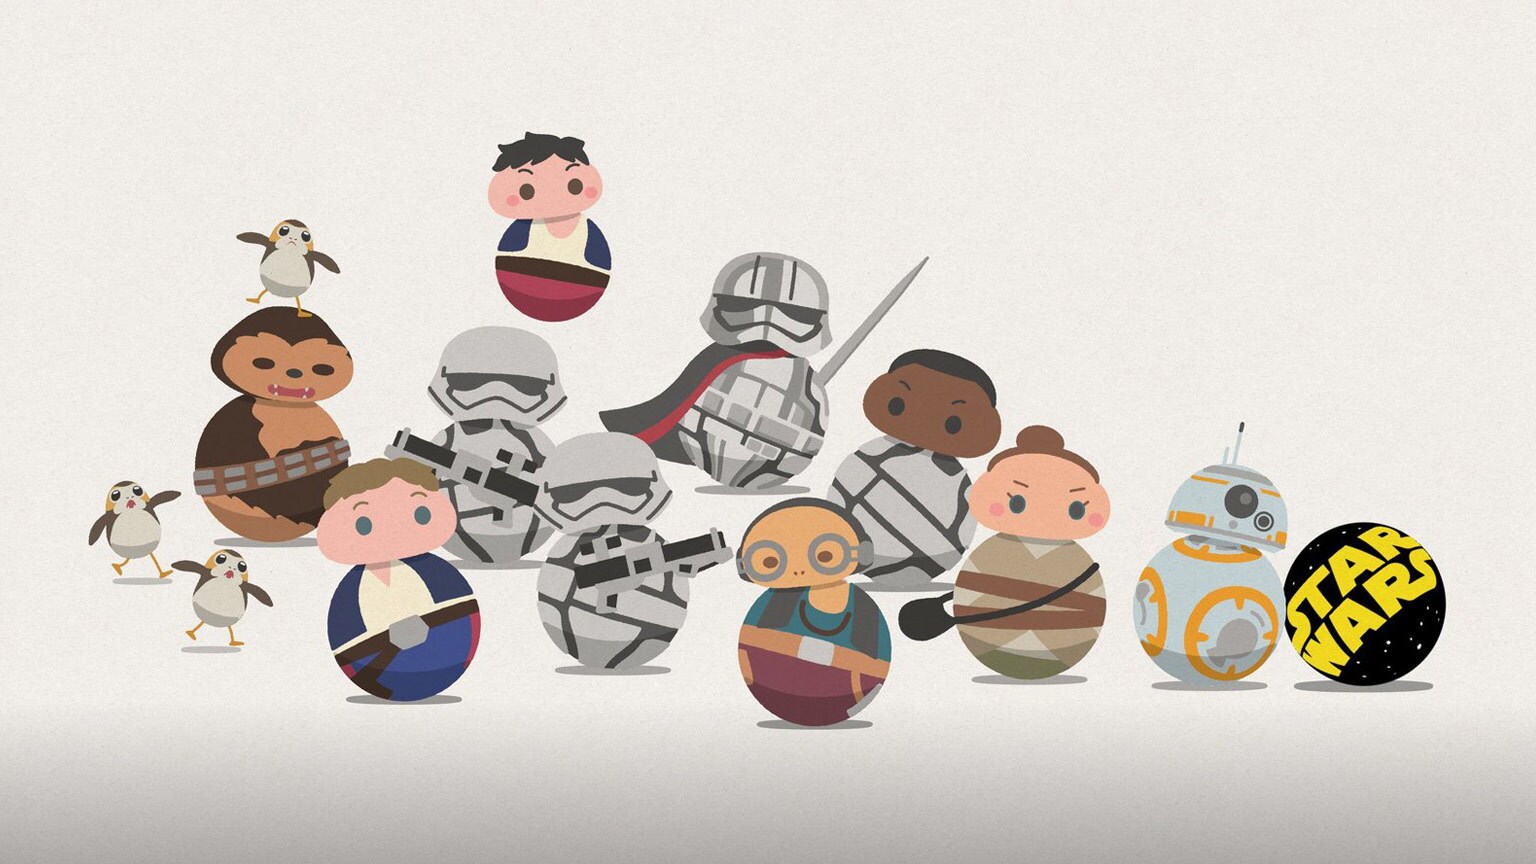 Star Wars Roll Out, An Adorable New Series of Animated Shorts, Bounces to the Screen - Exclusive